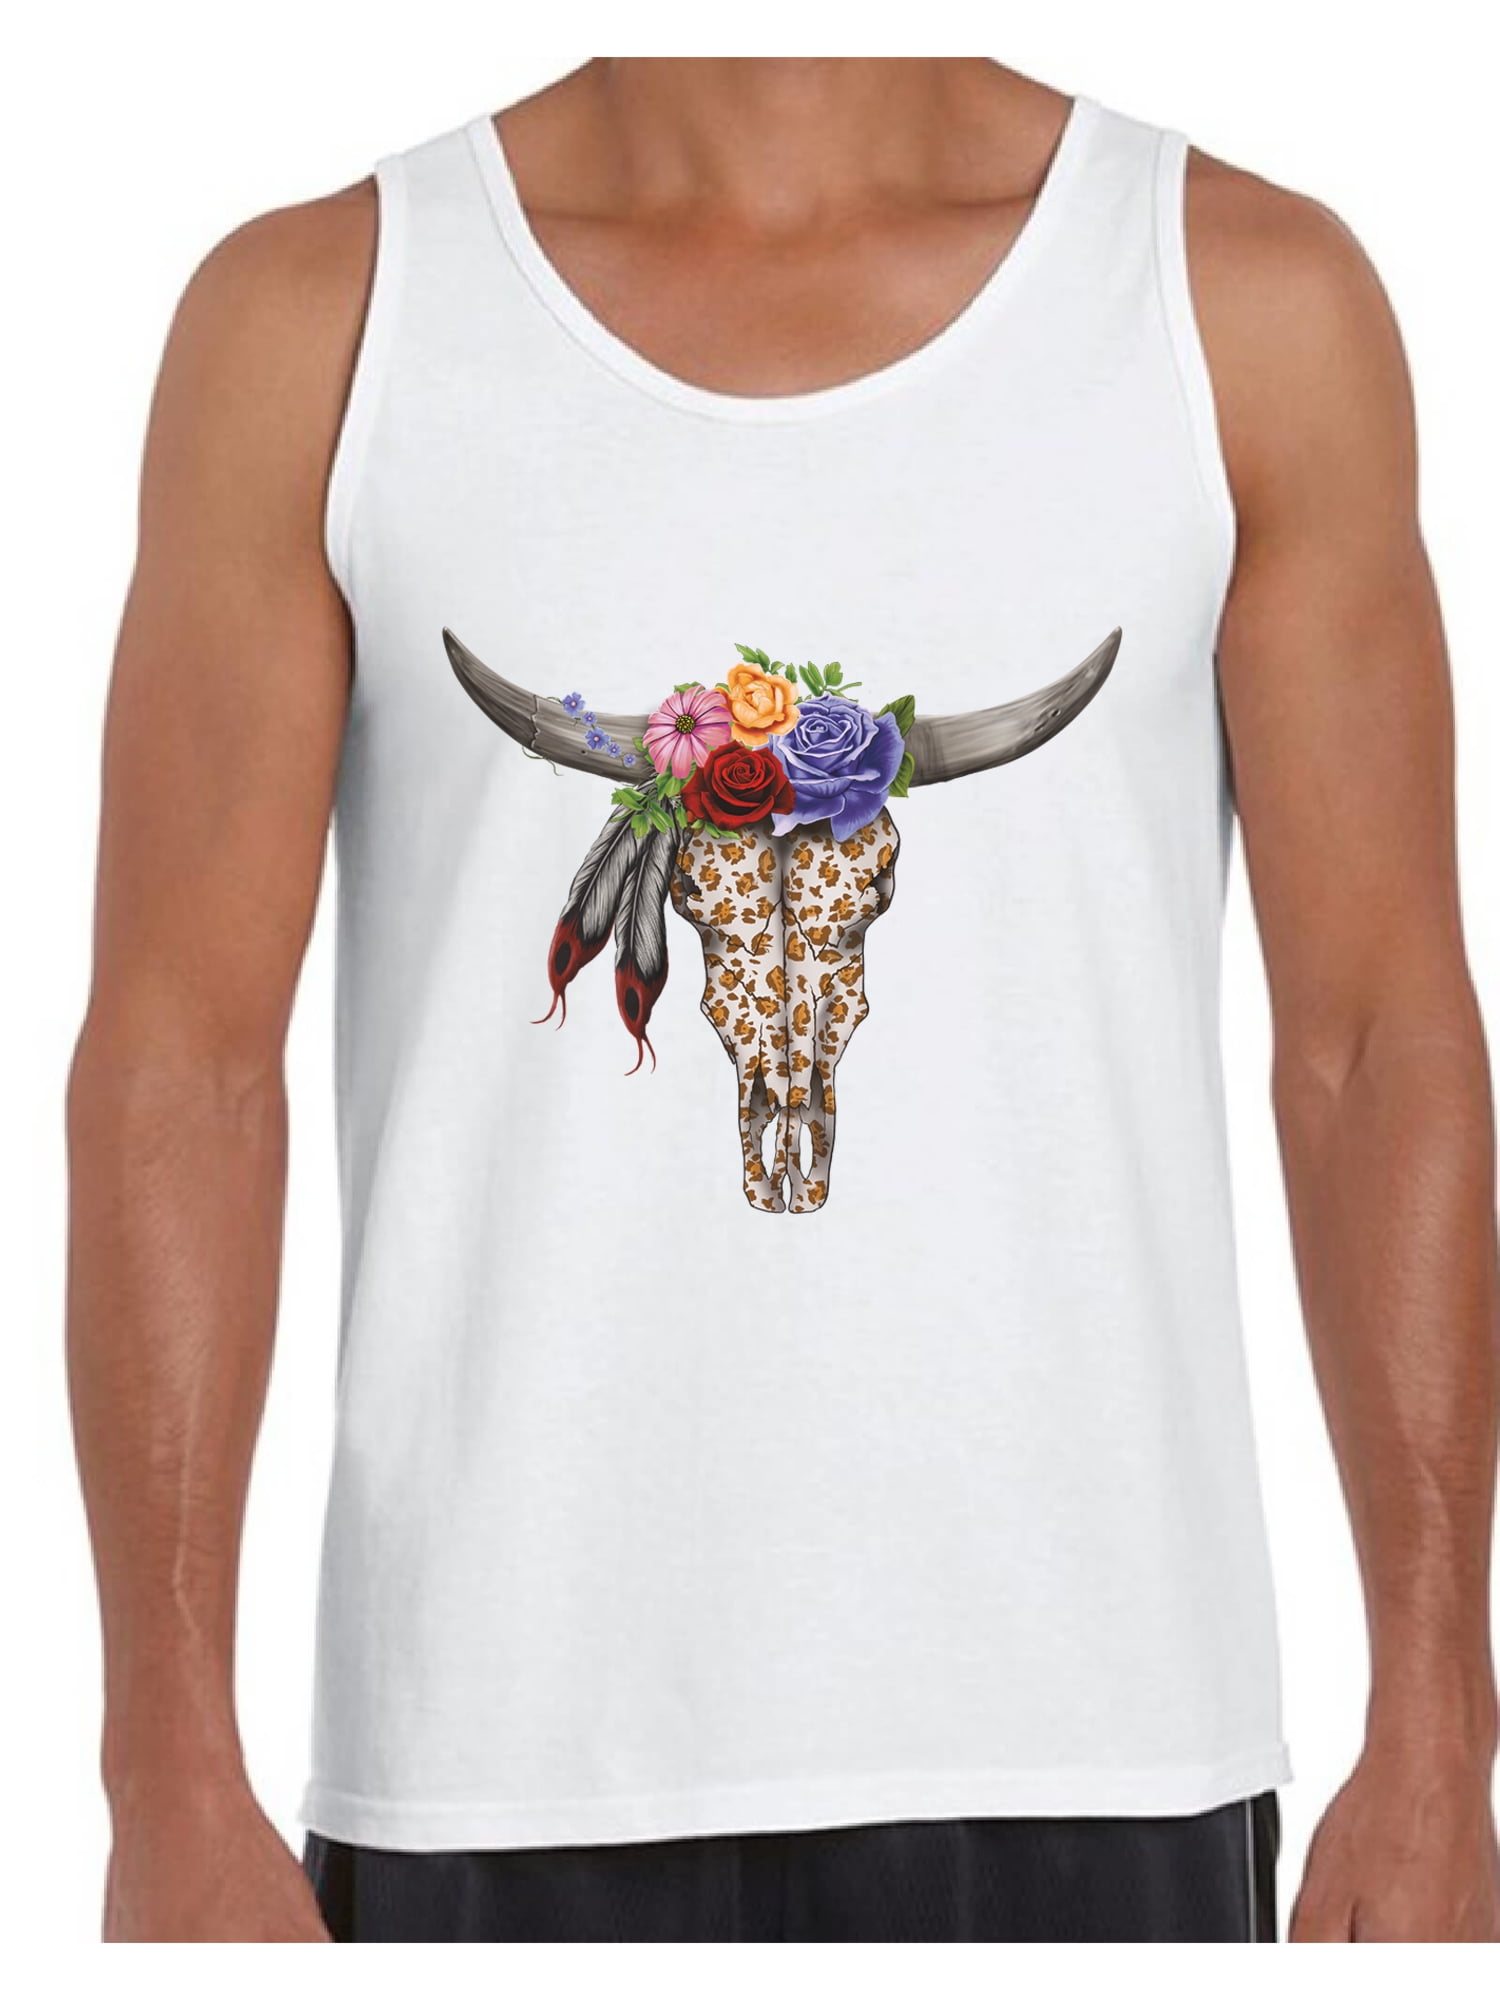 Cow Skull Tank Top Men's Skull Tank Day of the Dead Gifts for Him. Floral Bull Skull Muscle Shirt